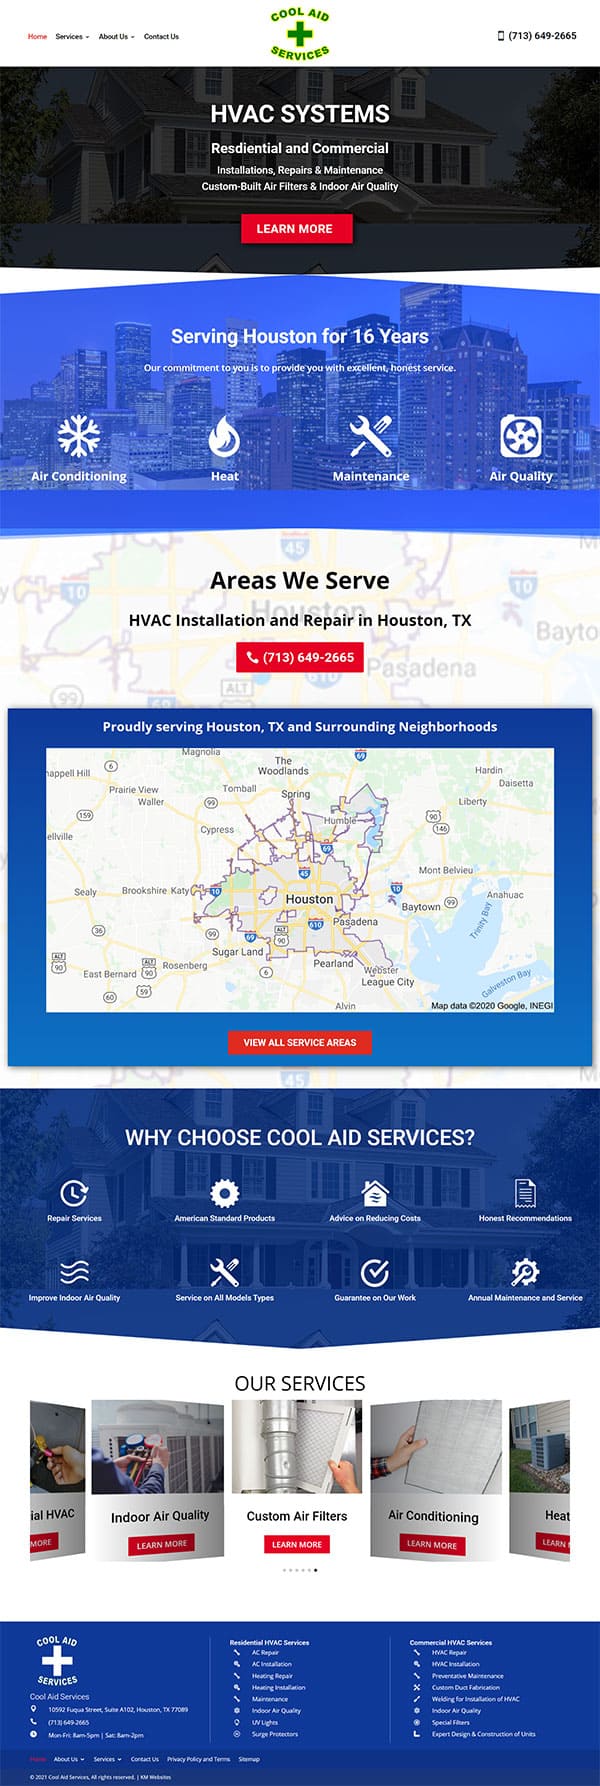 Cool Aid Services Home Page